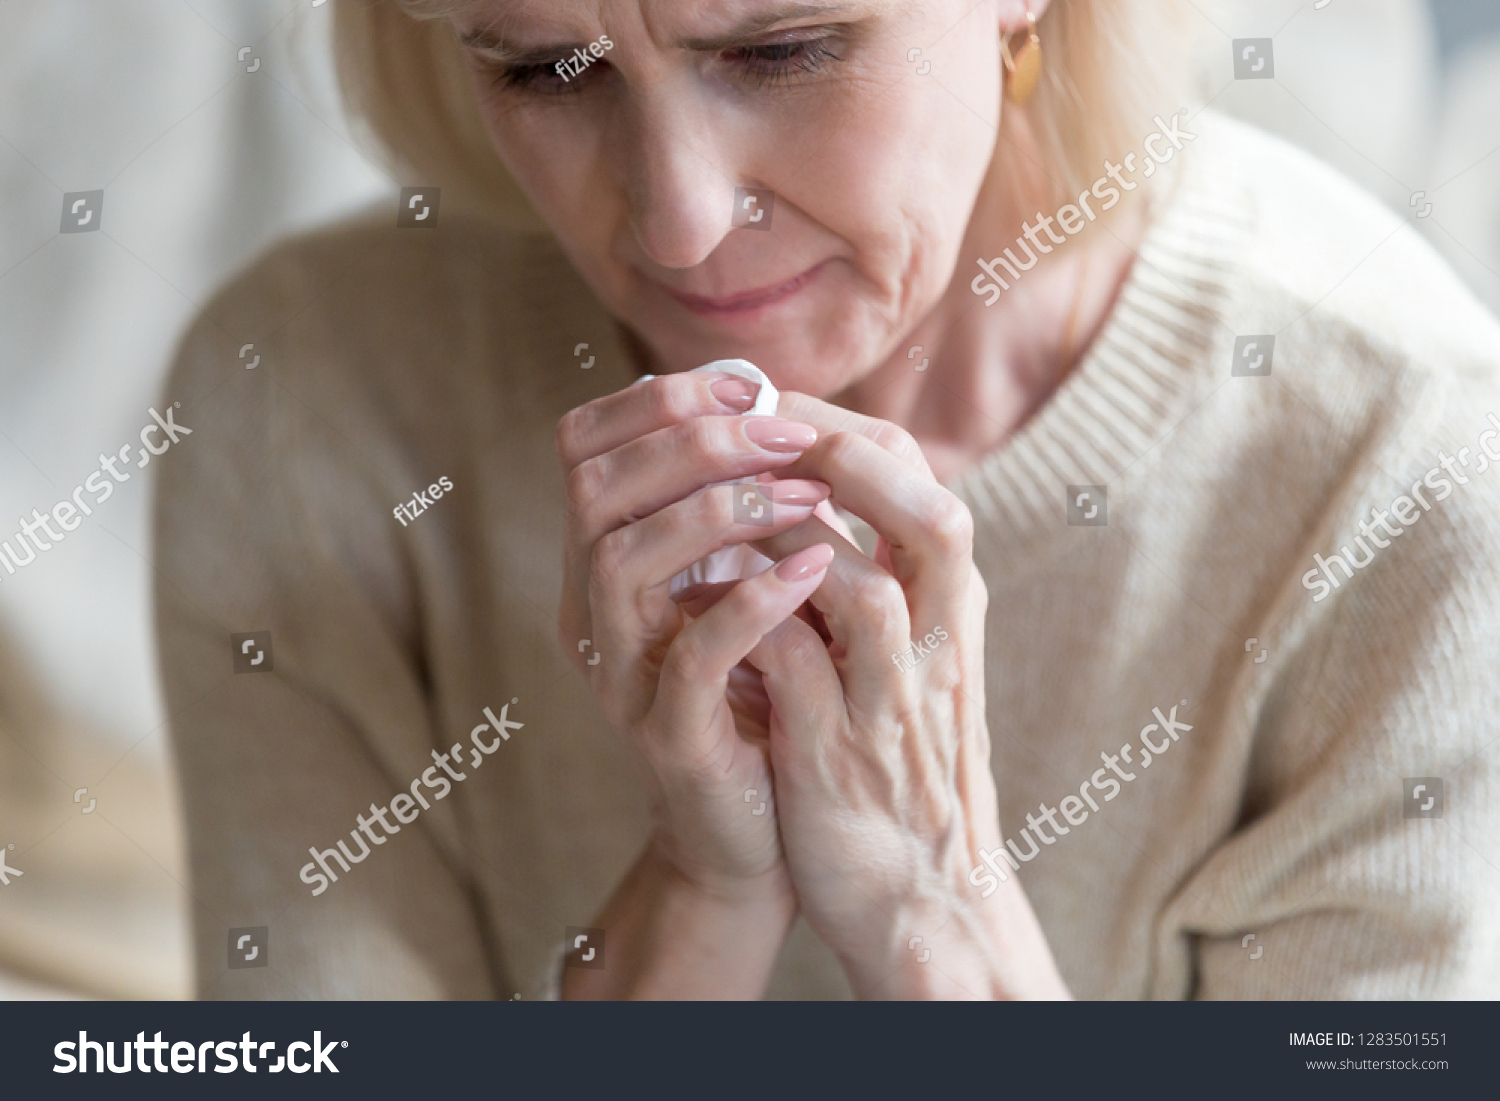 Unhappy middle aged woman folding hands together holding handkerchief crying feels bad and miserable, close up image. Sad life circumstances, death of relative person and terminal illness concept #1283501551